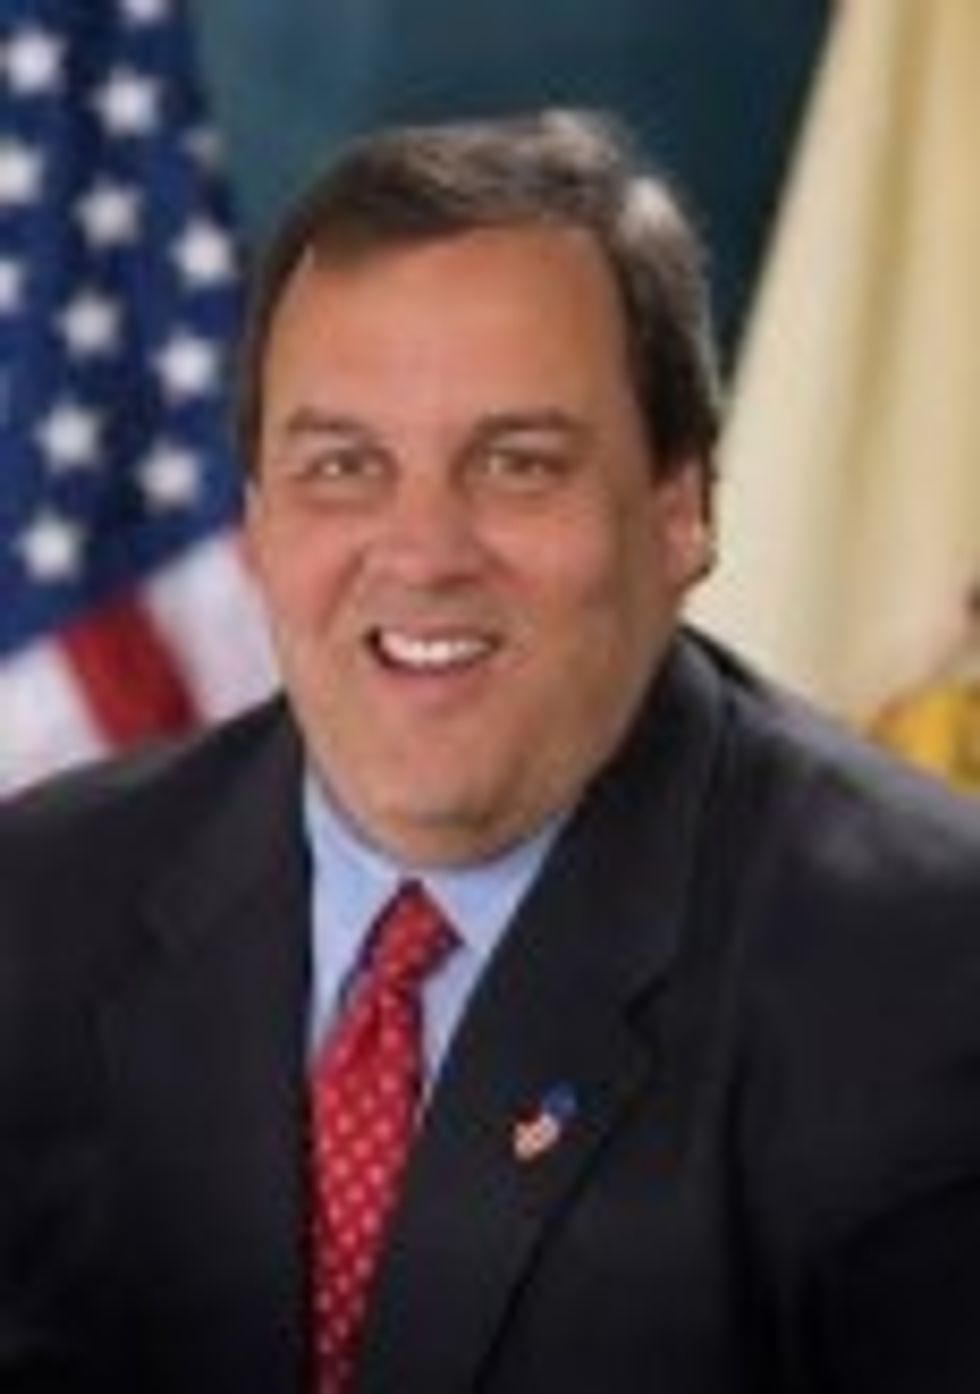 Nanny State RINO New Jersey Governor Chris Christie Cancels Children's Holiday, Inpeach!